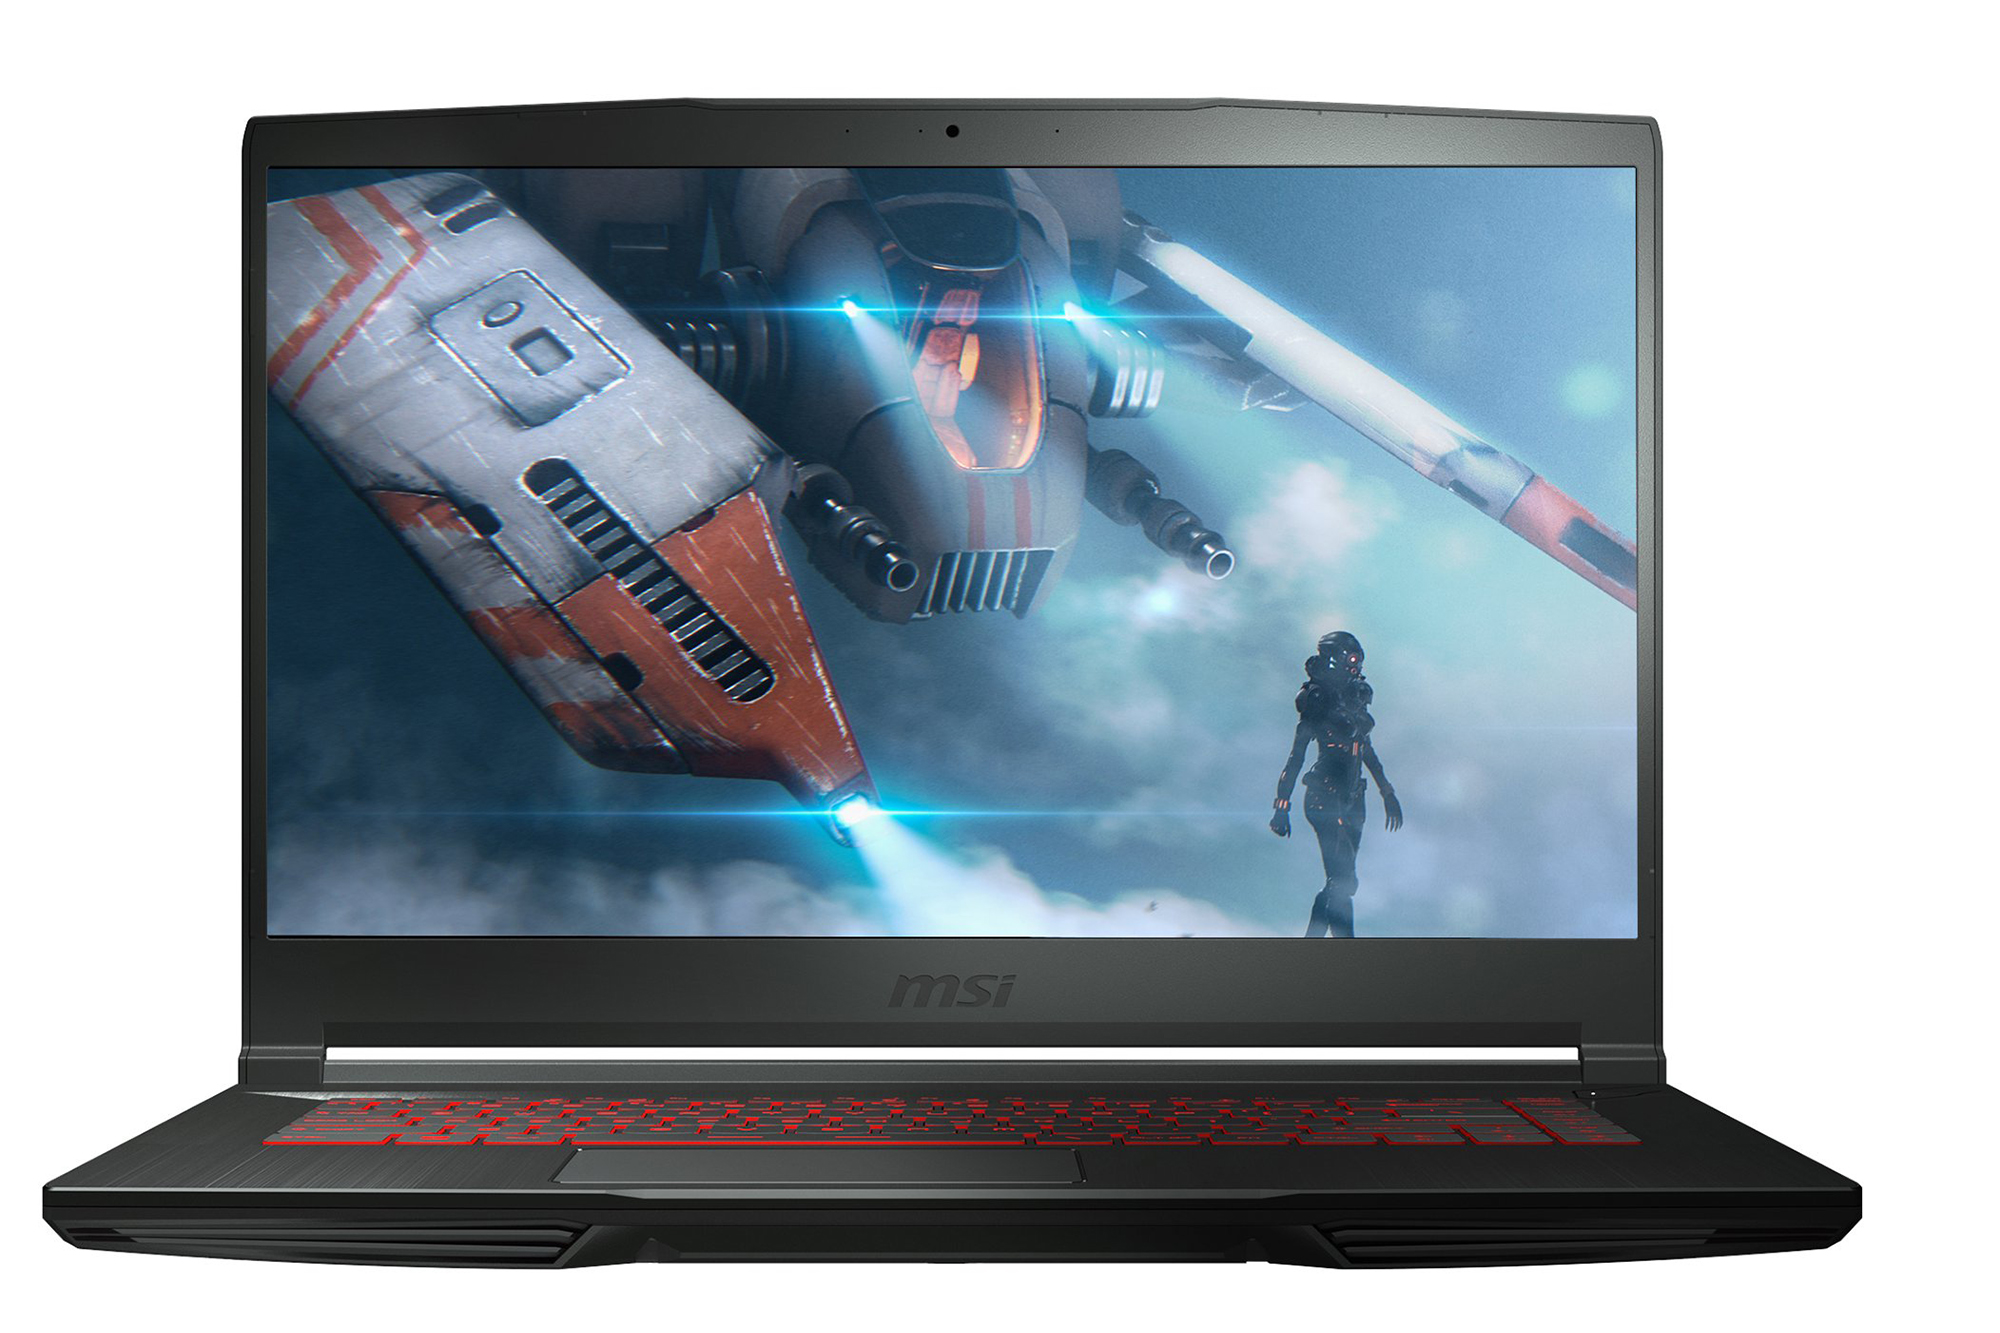 A gaming laptop showing a scene from a video game on the screen 